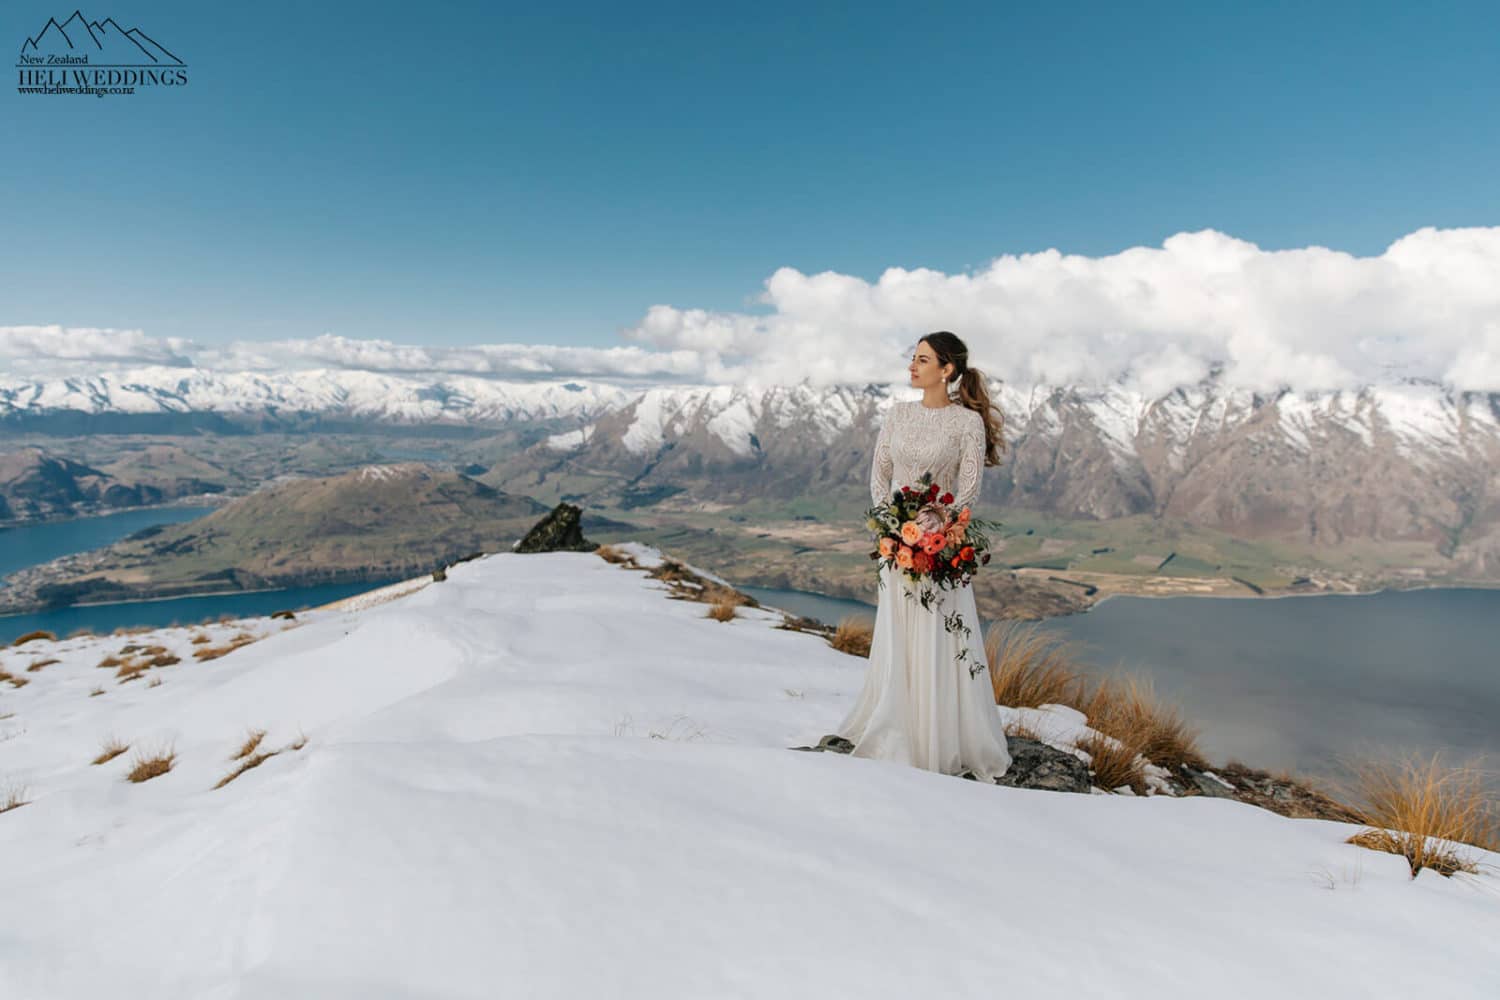 Queenstown Helicopter wedding in the snow